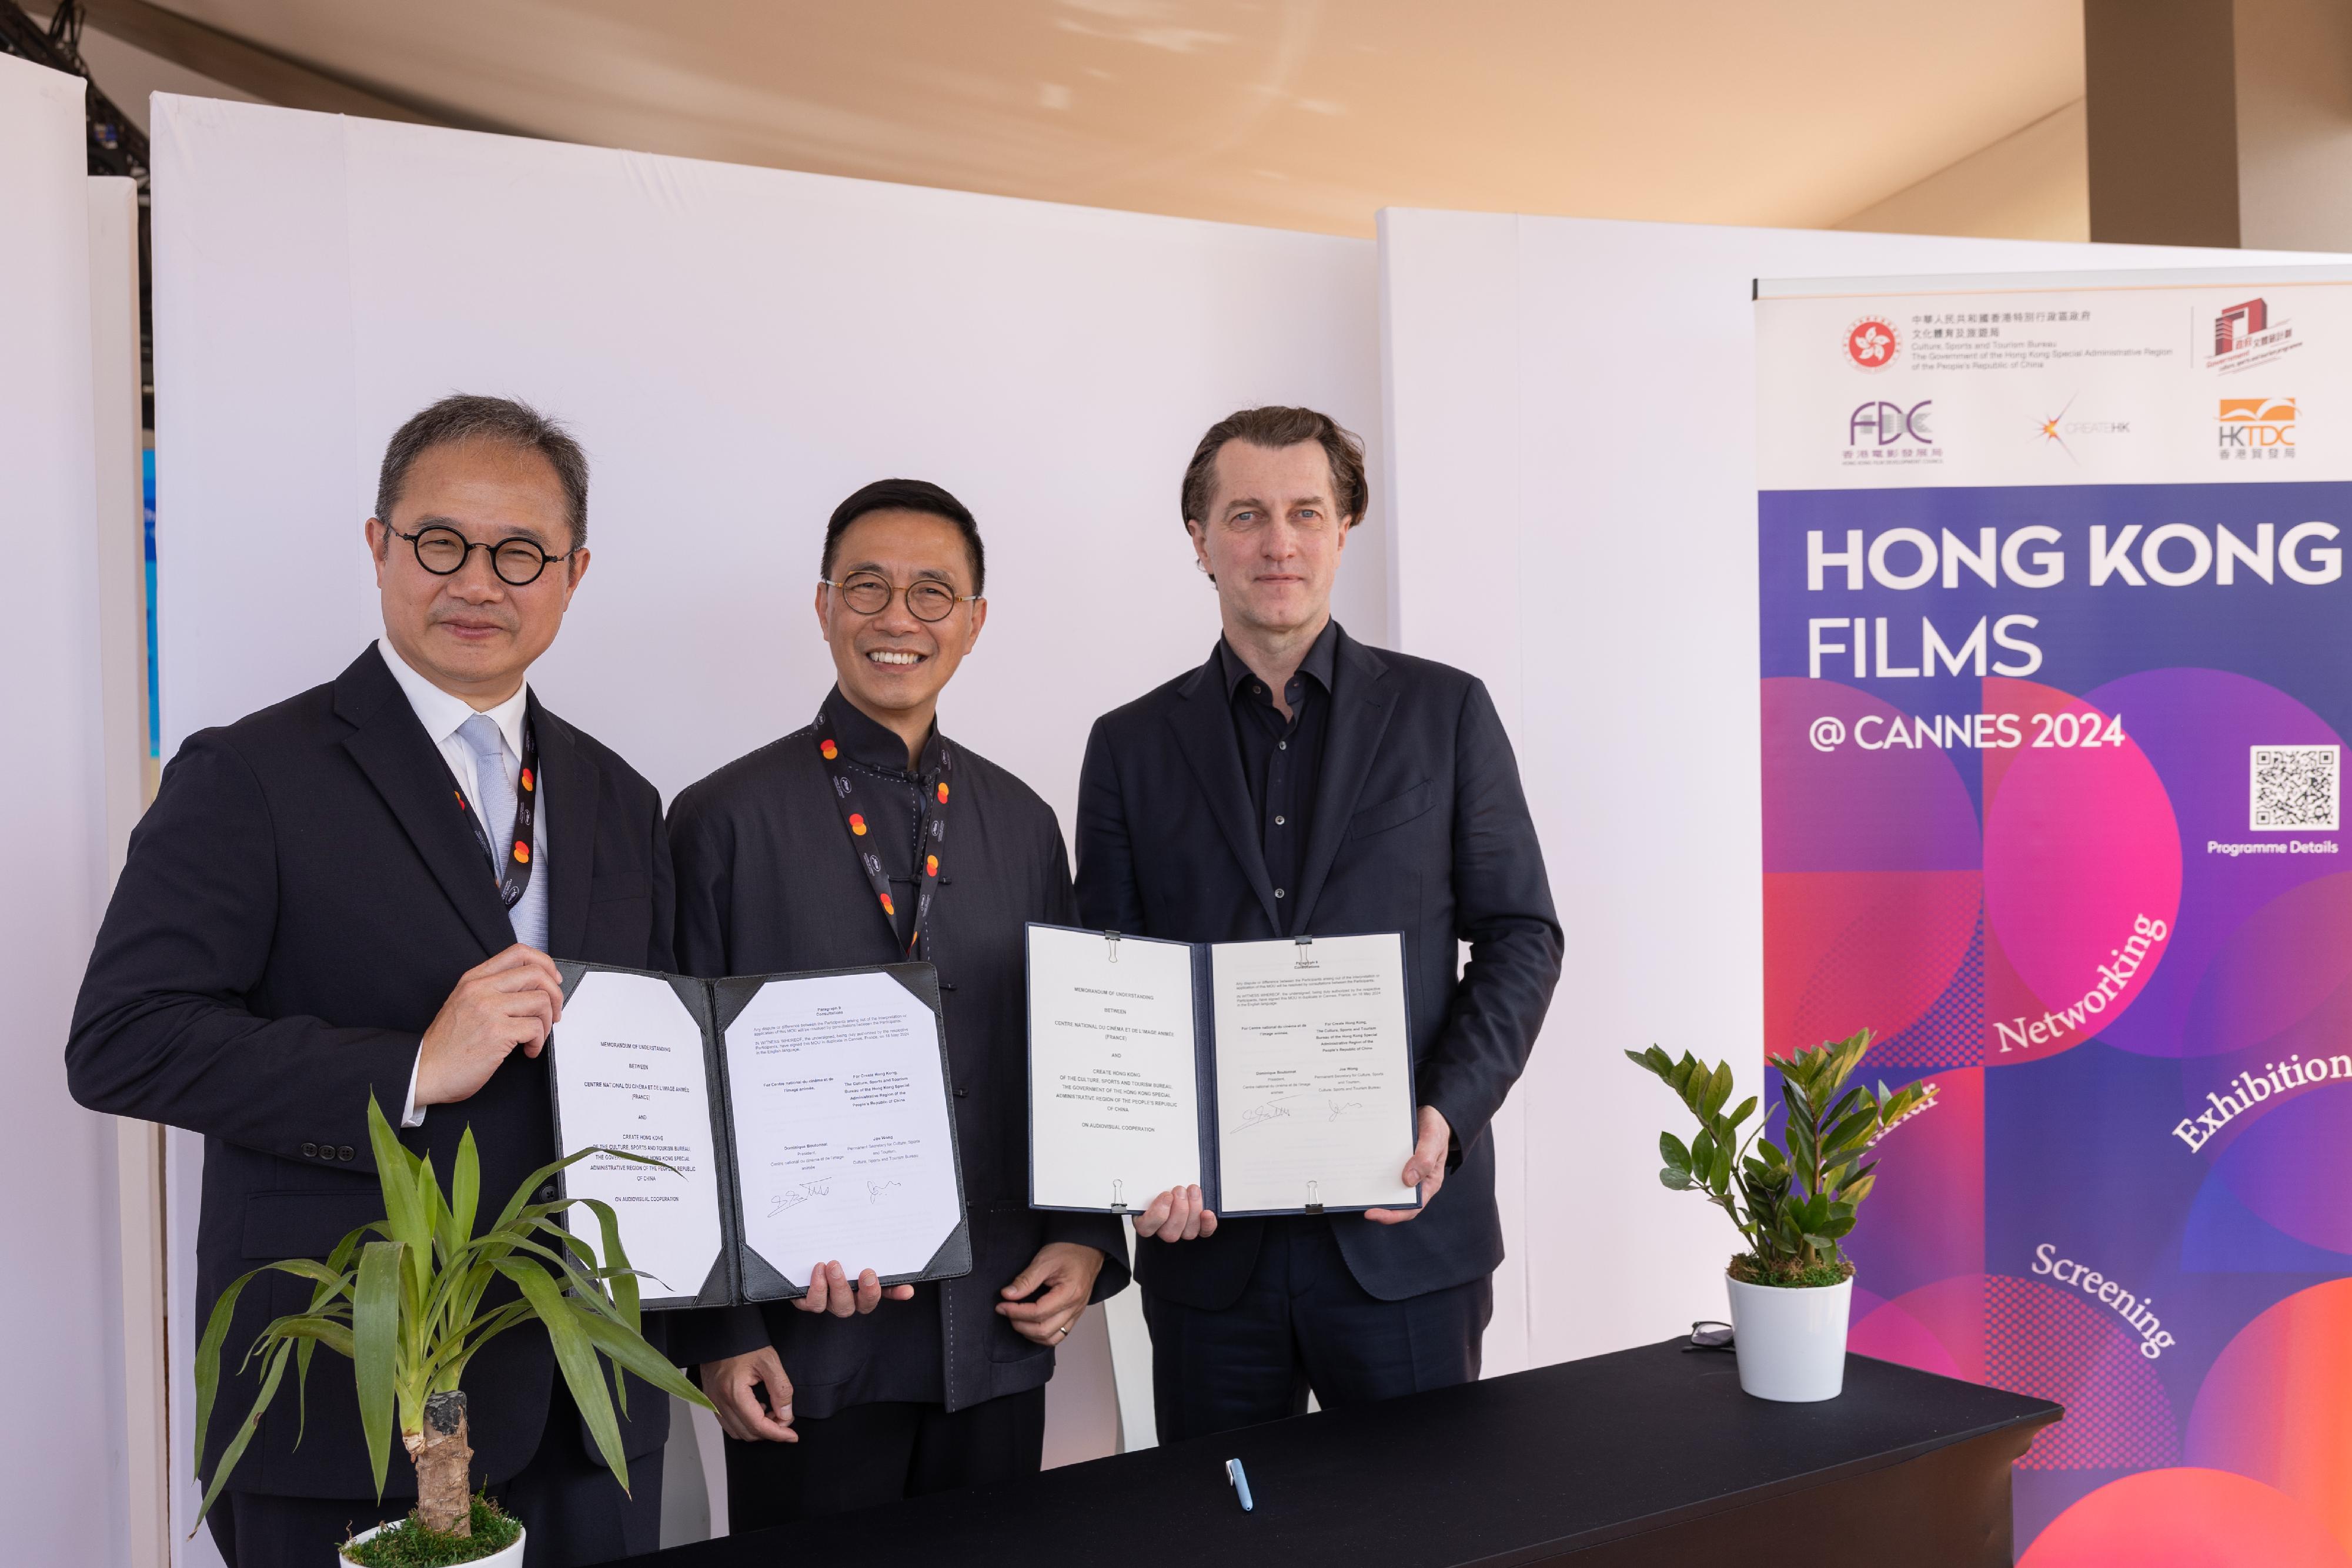 The Secretary for Culture, Sports and Tourism, Mr Kevin Yeung, led a Hong Kong film industry delegation to the 77th Cannes Film Festival in France. On May 16 (Cannes time), Mr Yeung (centre) attended the signing ceremony for a Memorandum of Understanding on film and television co-operation between Create Hong Kong, represented by the Permanent Secretary for Culture, Sports and Tourism, Mr Joe Wong (left), and the Centre national du cinéma et de l'image animée.